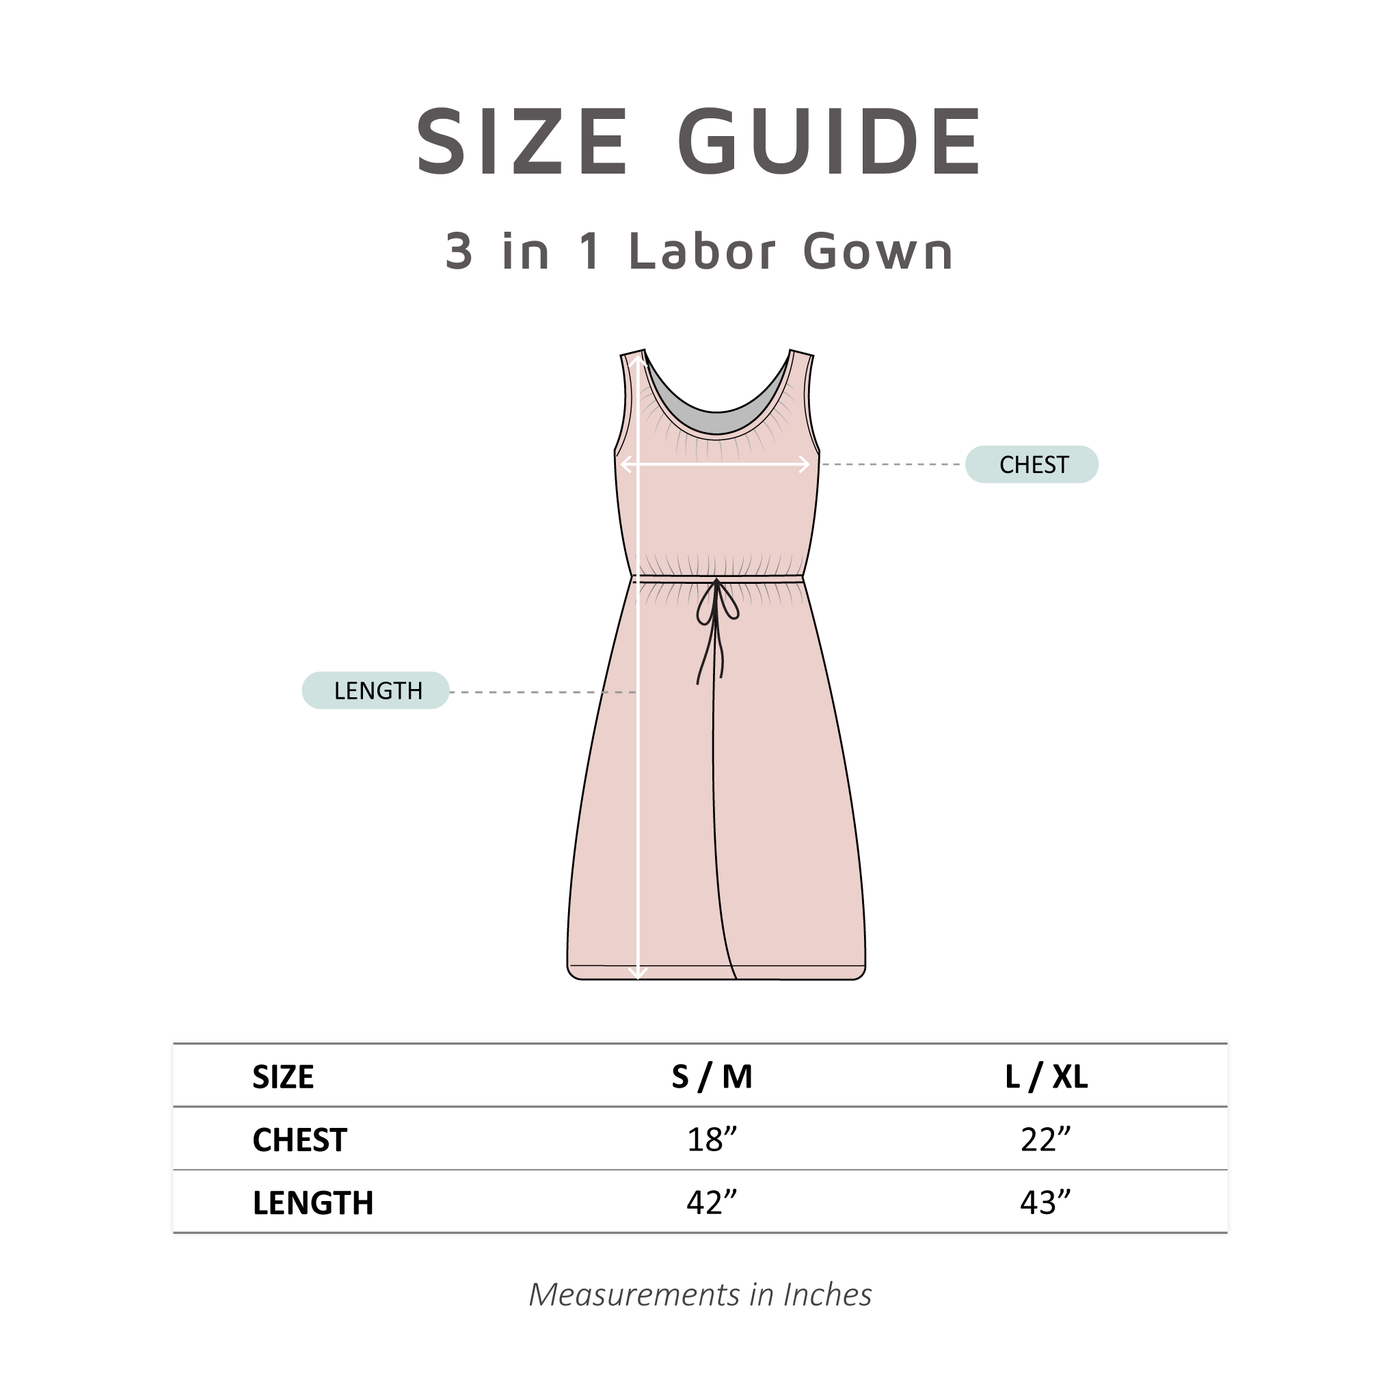 Rose 3 in 1 Labor Gown